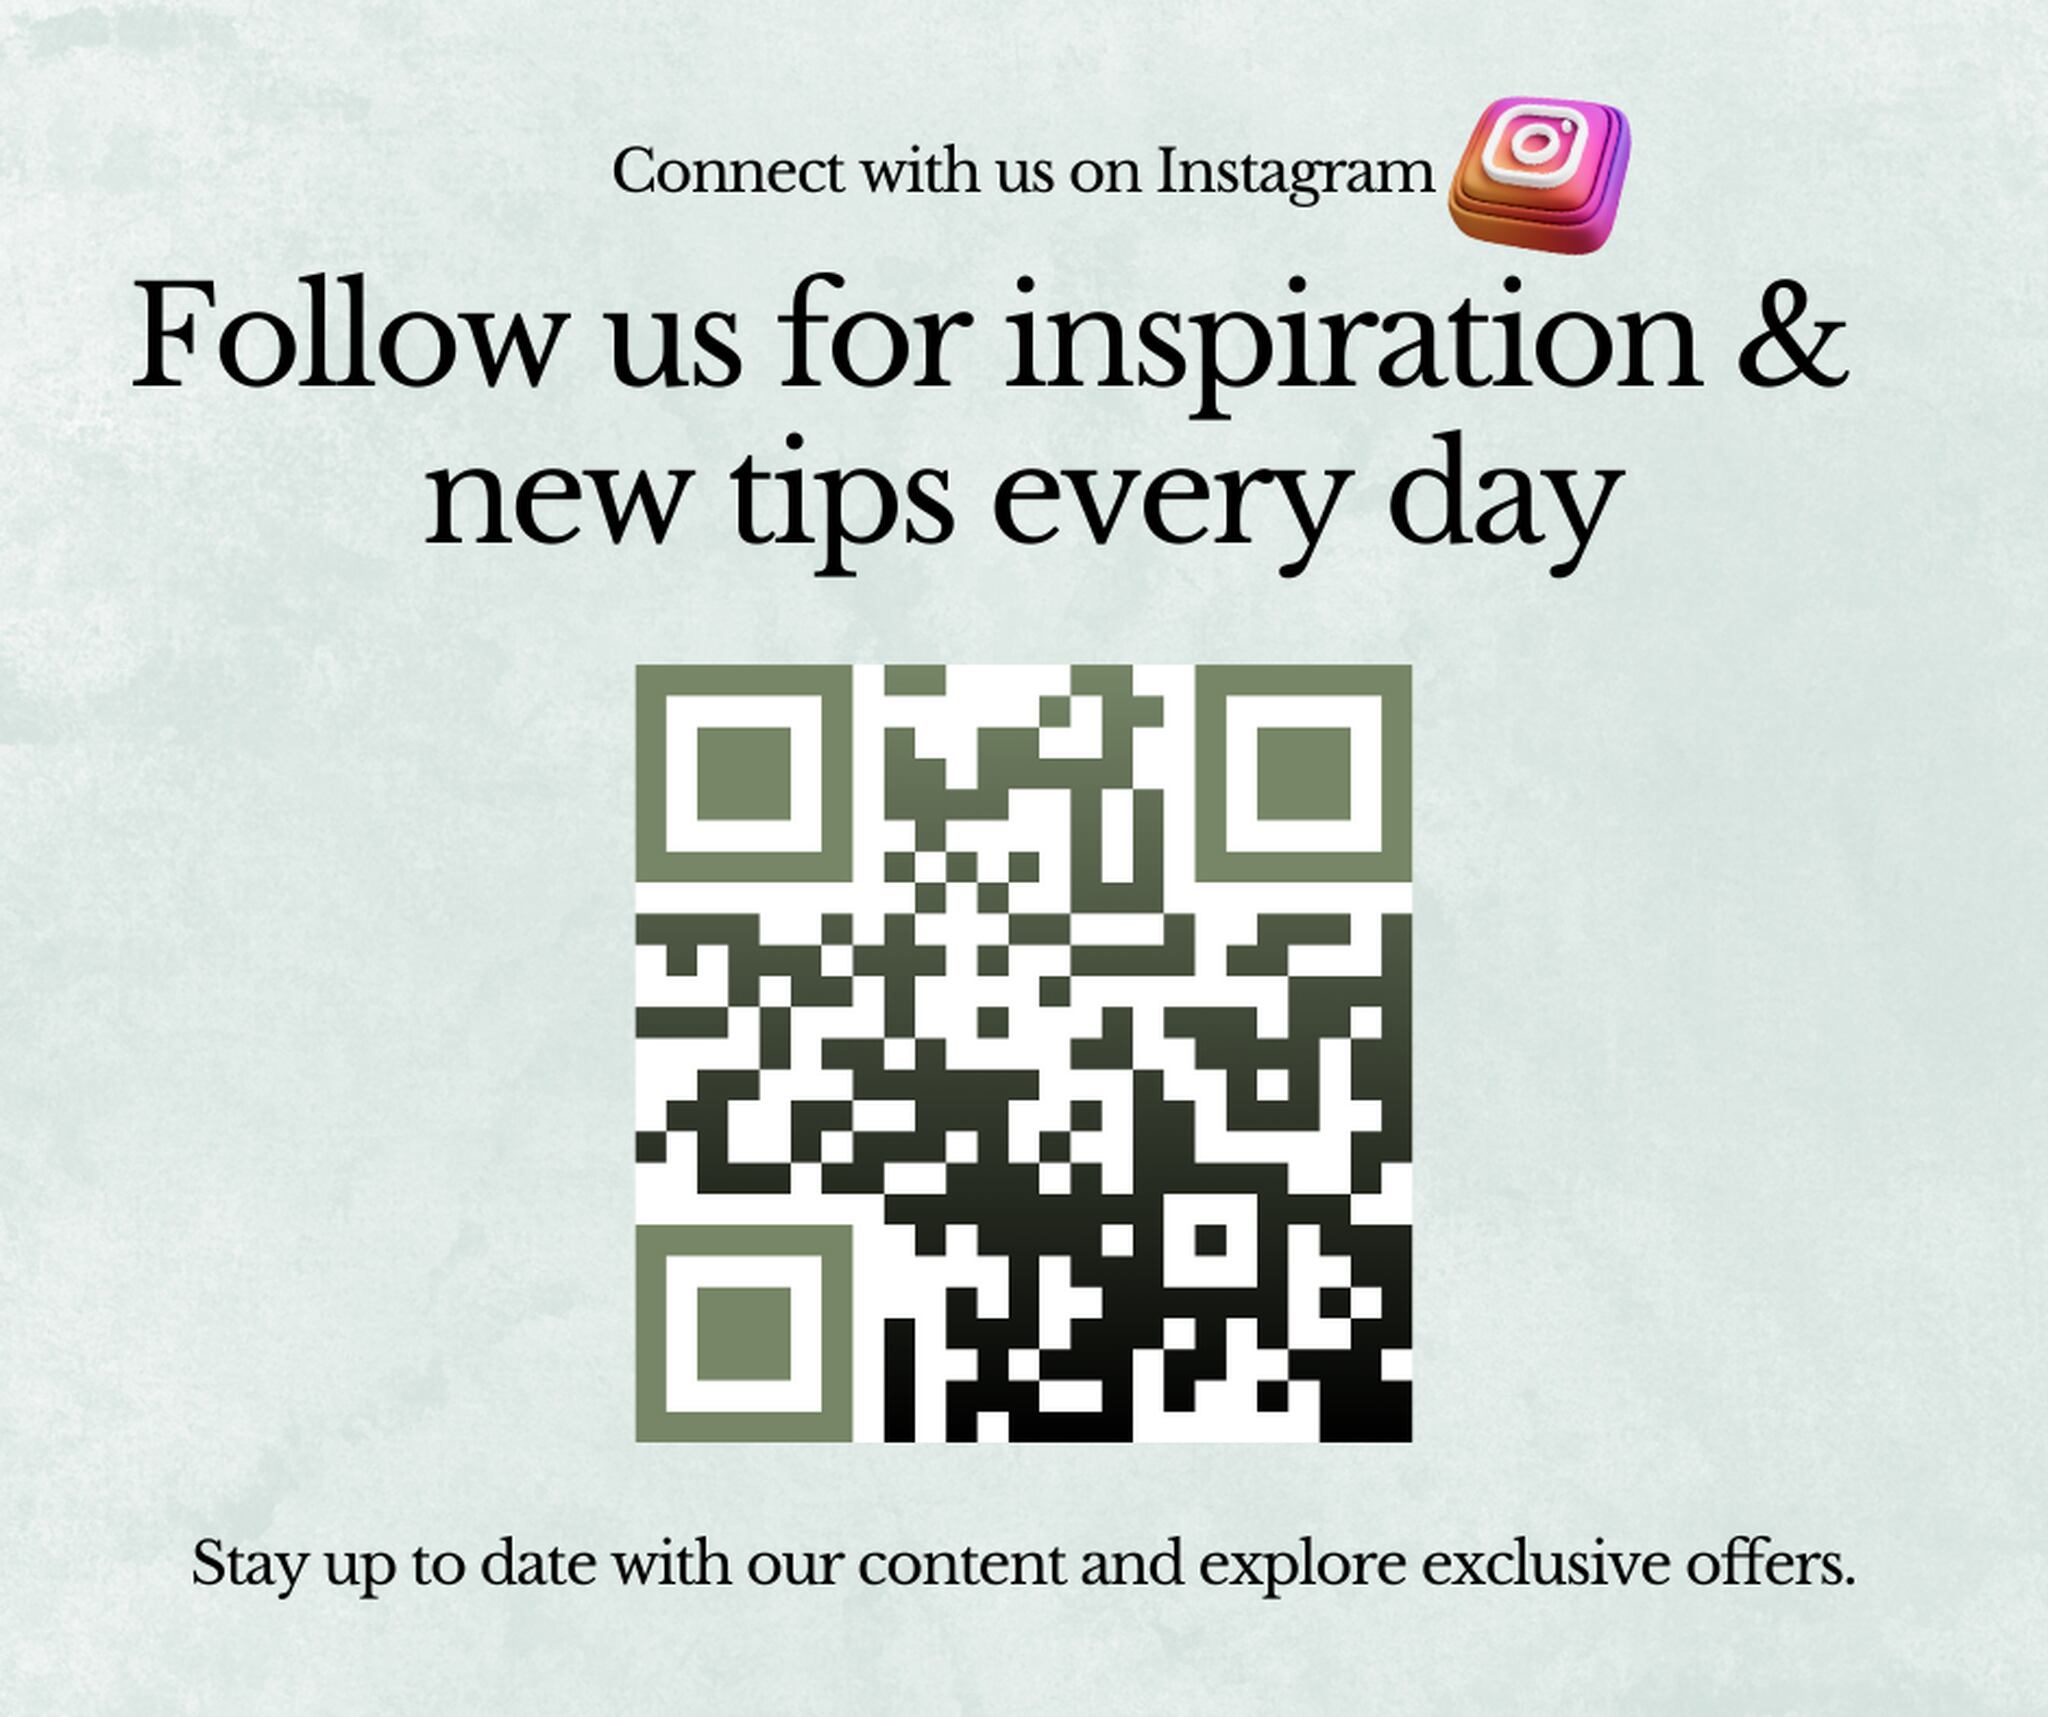 follow us on Instagram template with a green QR code